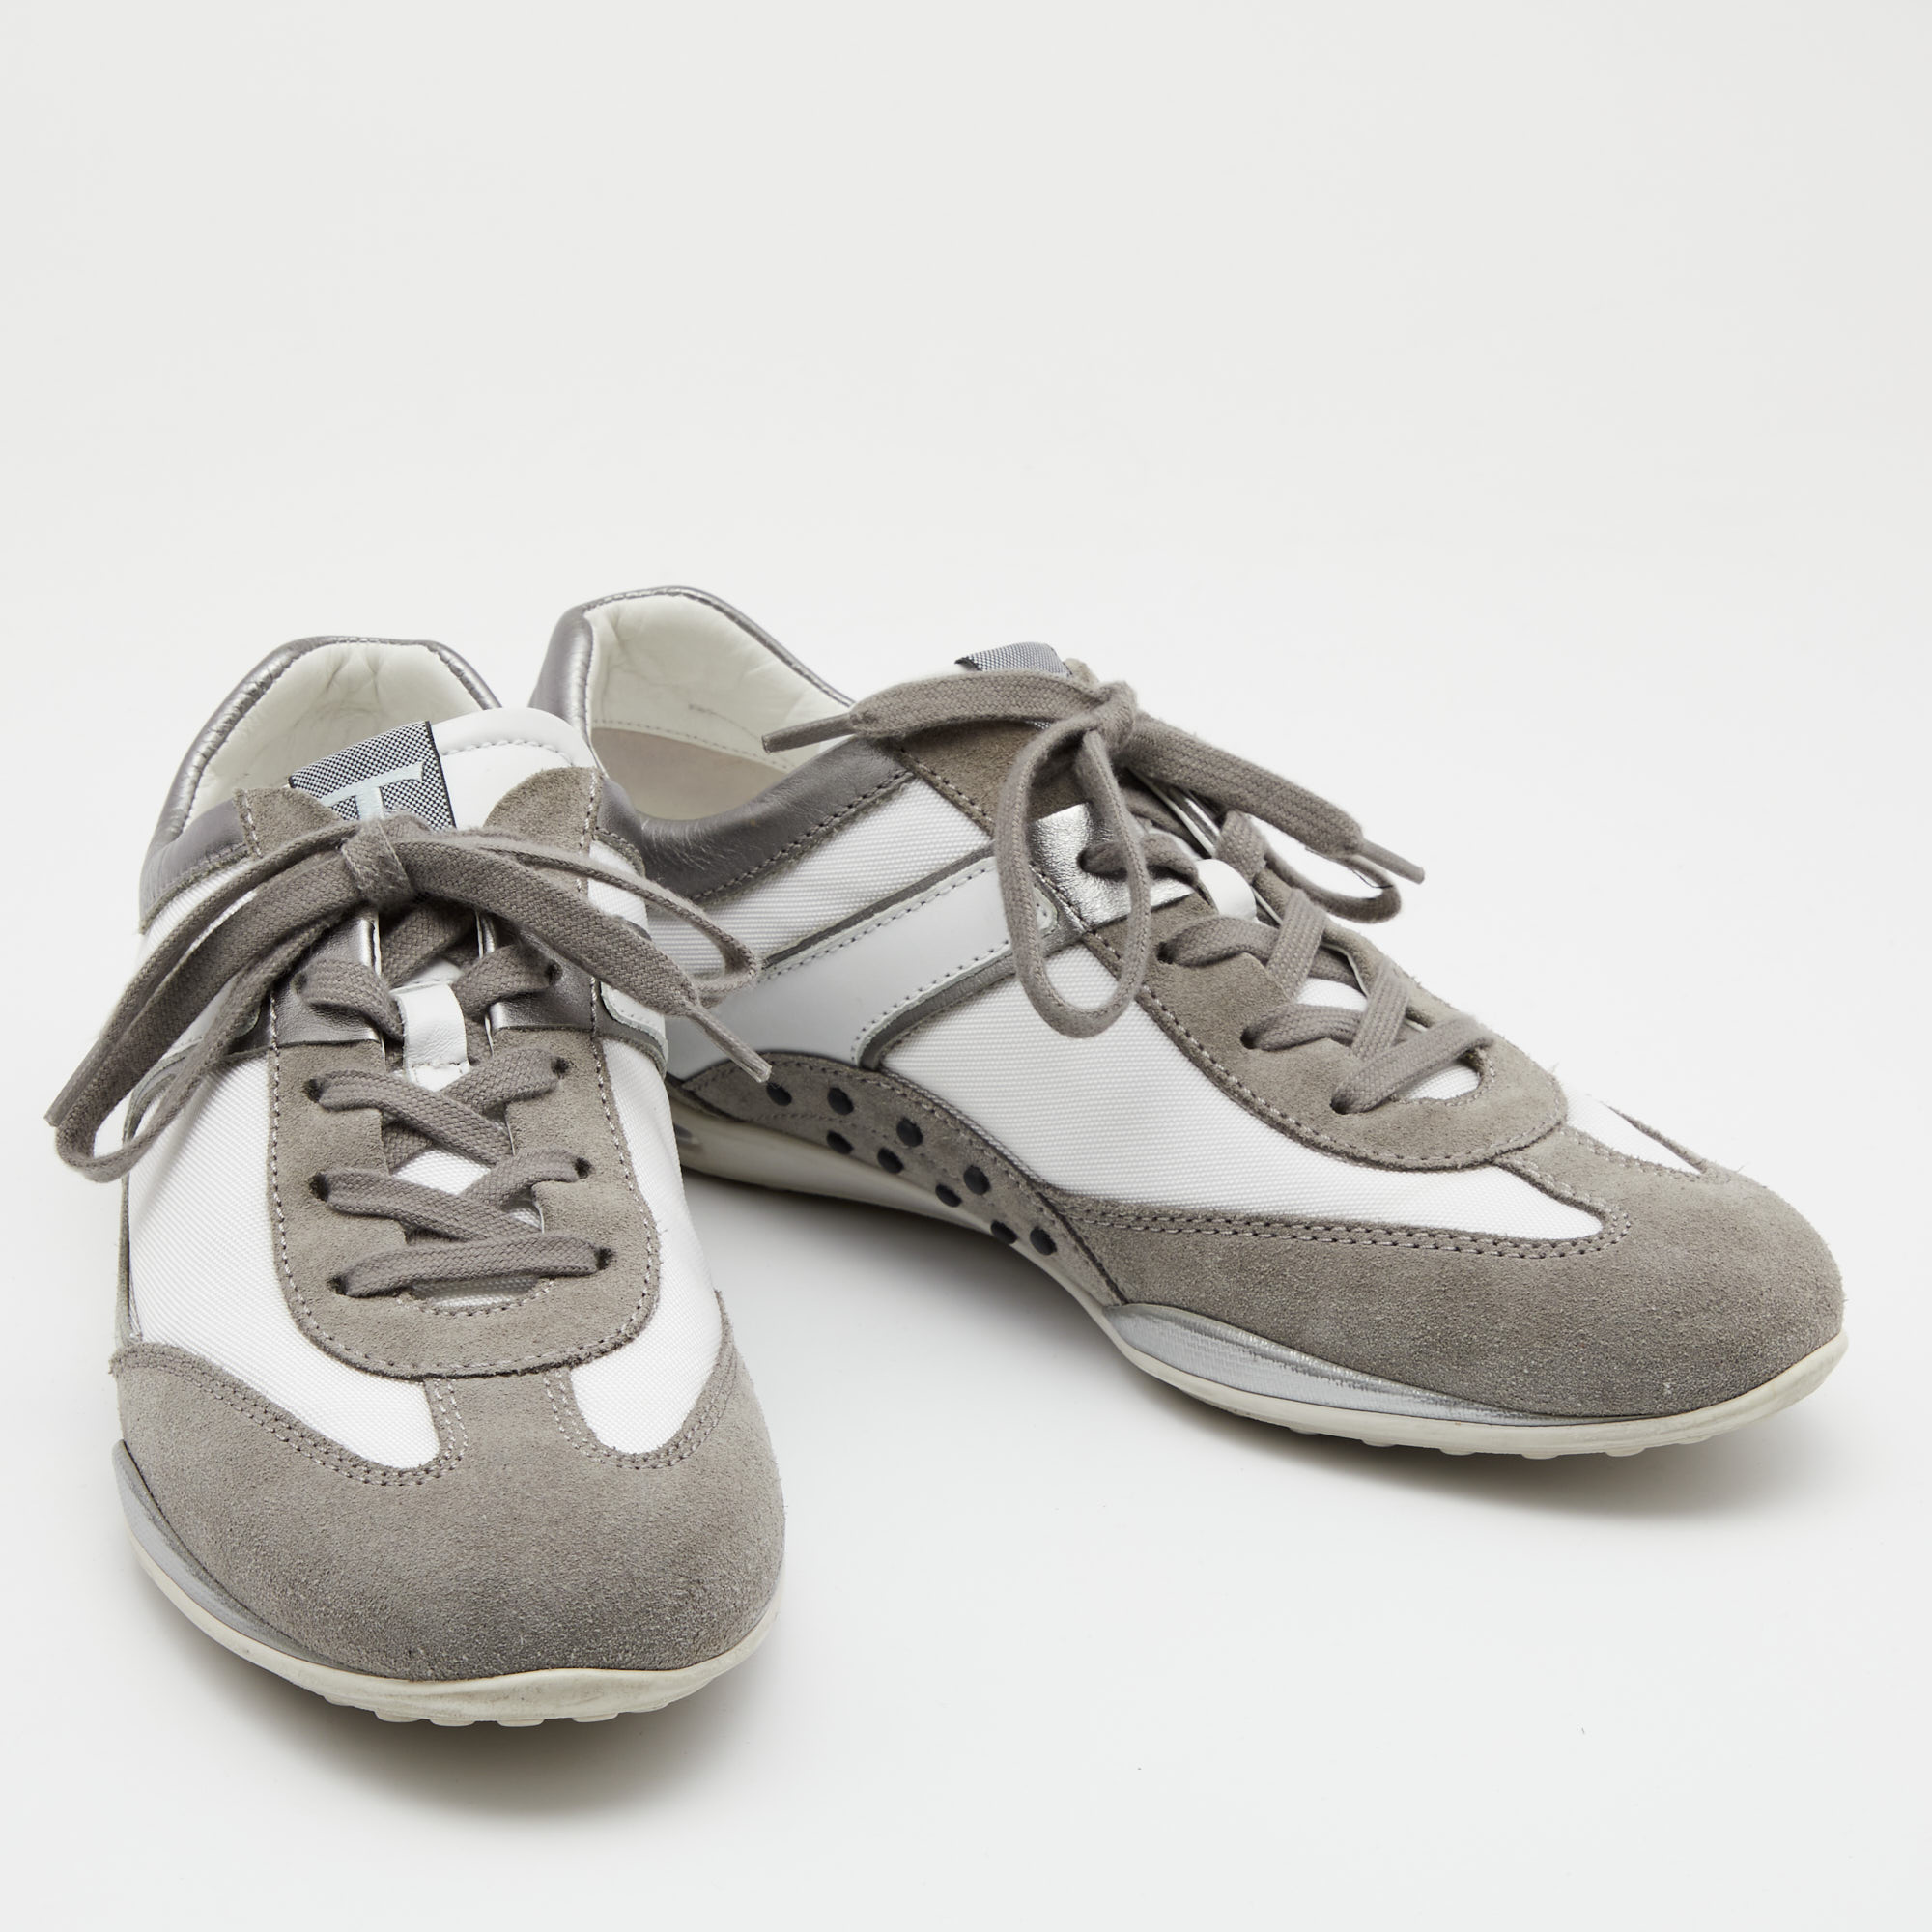 Tod's Grey/White Leather And Suede Lace Up Sneakers Size 40